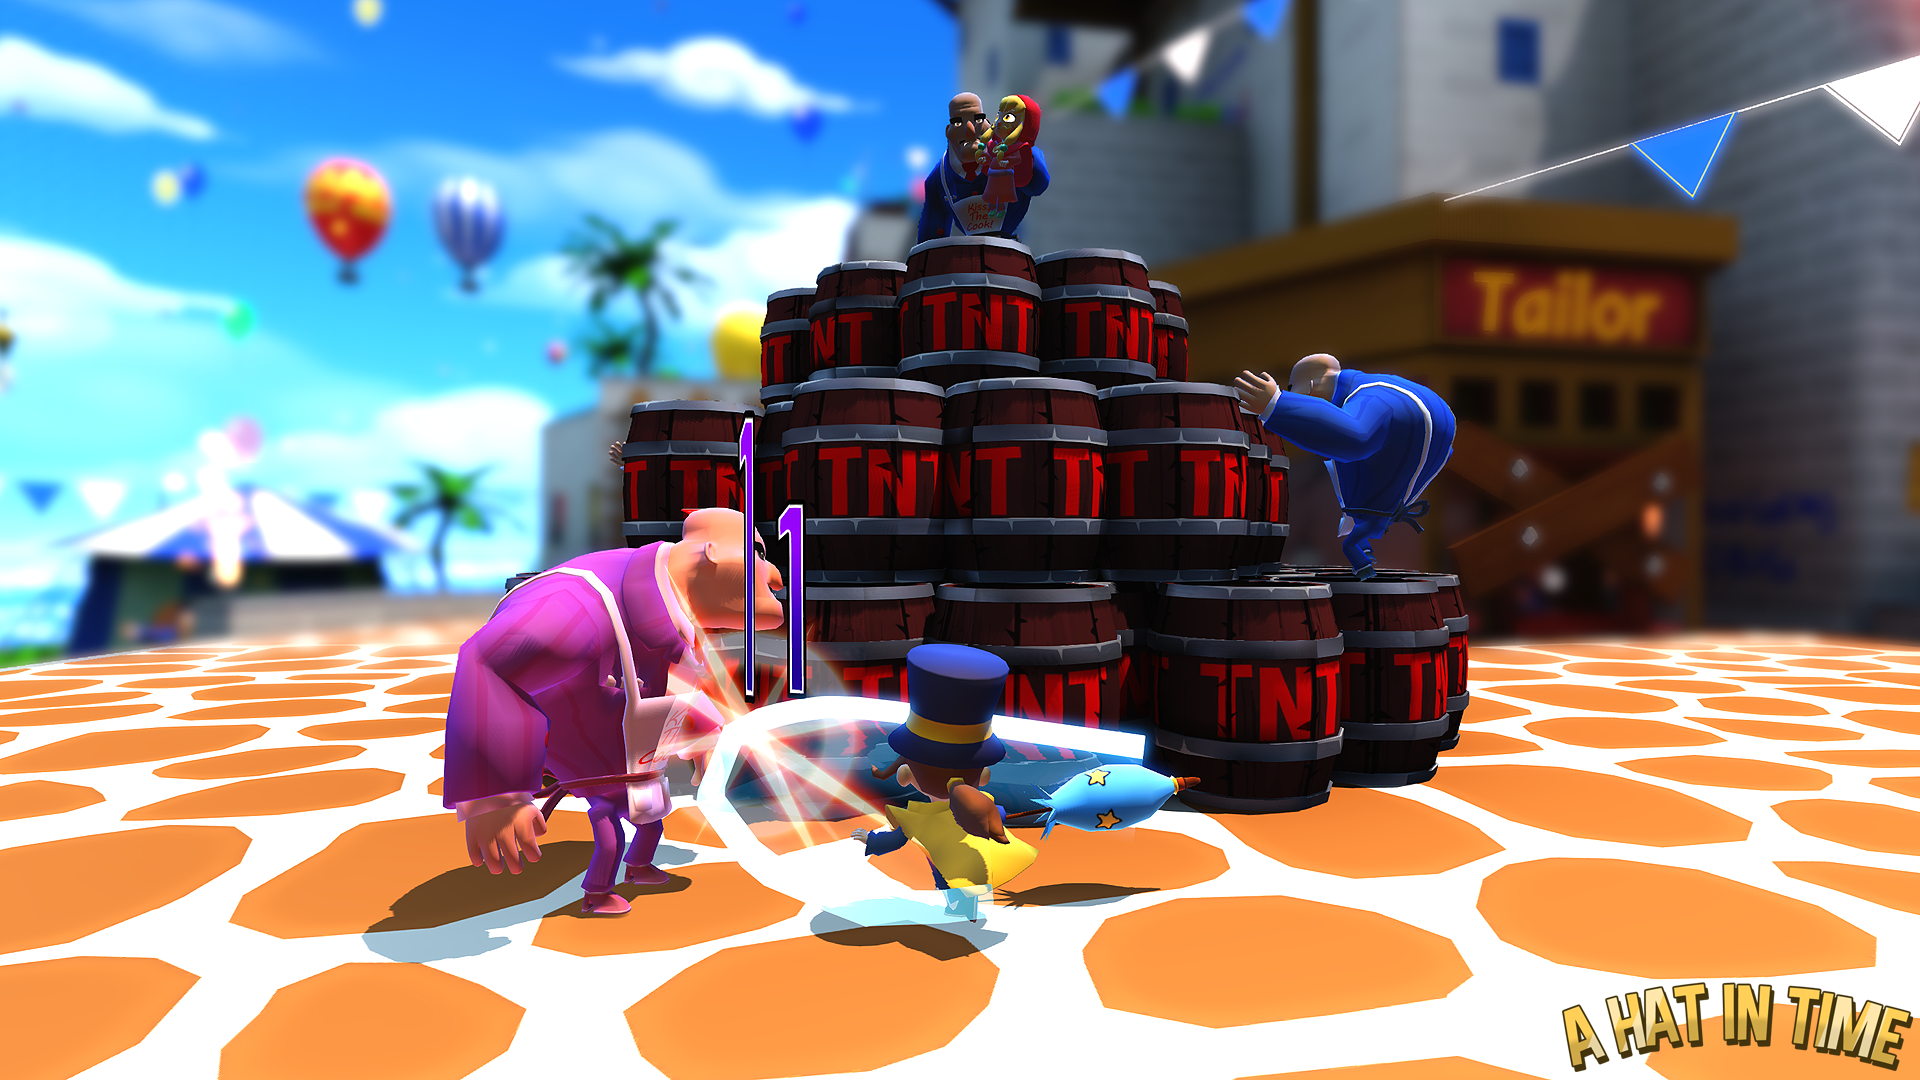 Exactly The Colourful 3D Platformer I Was Looking For